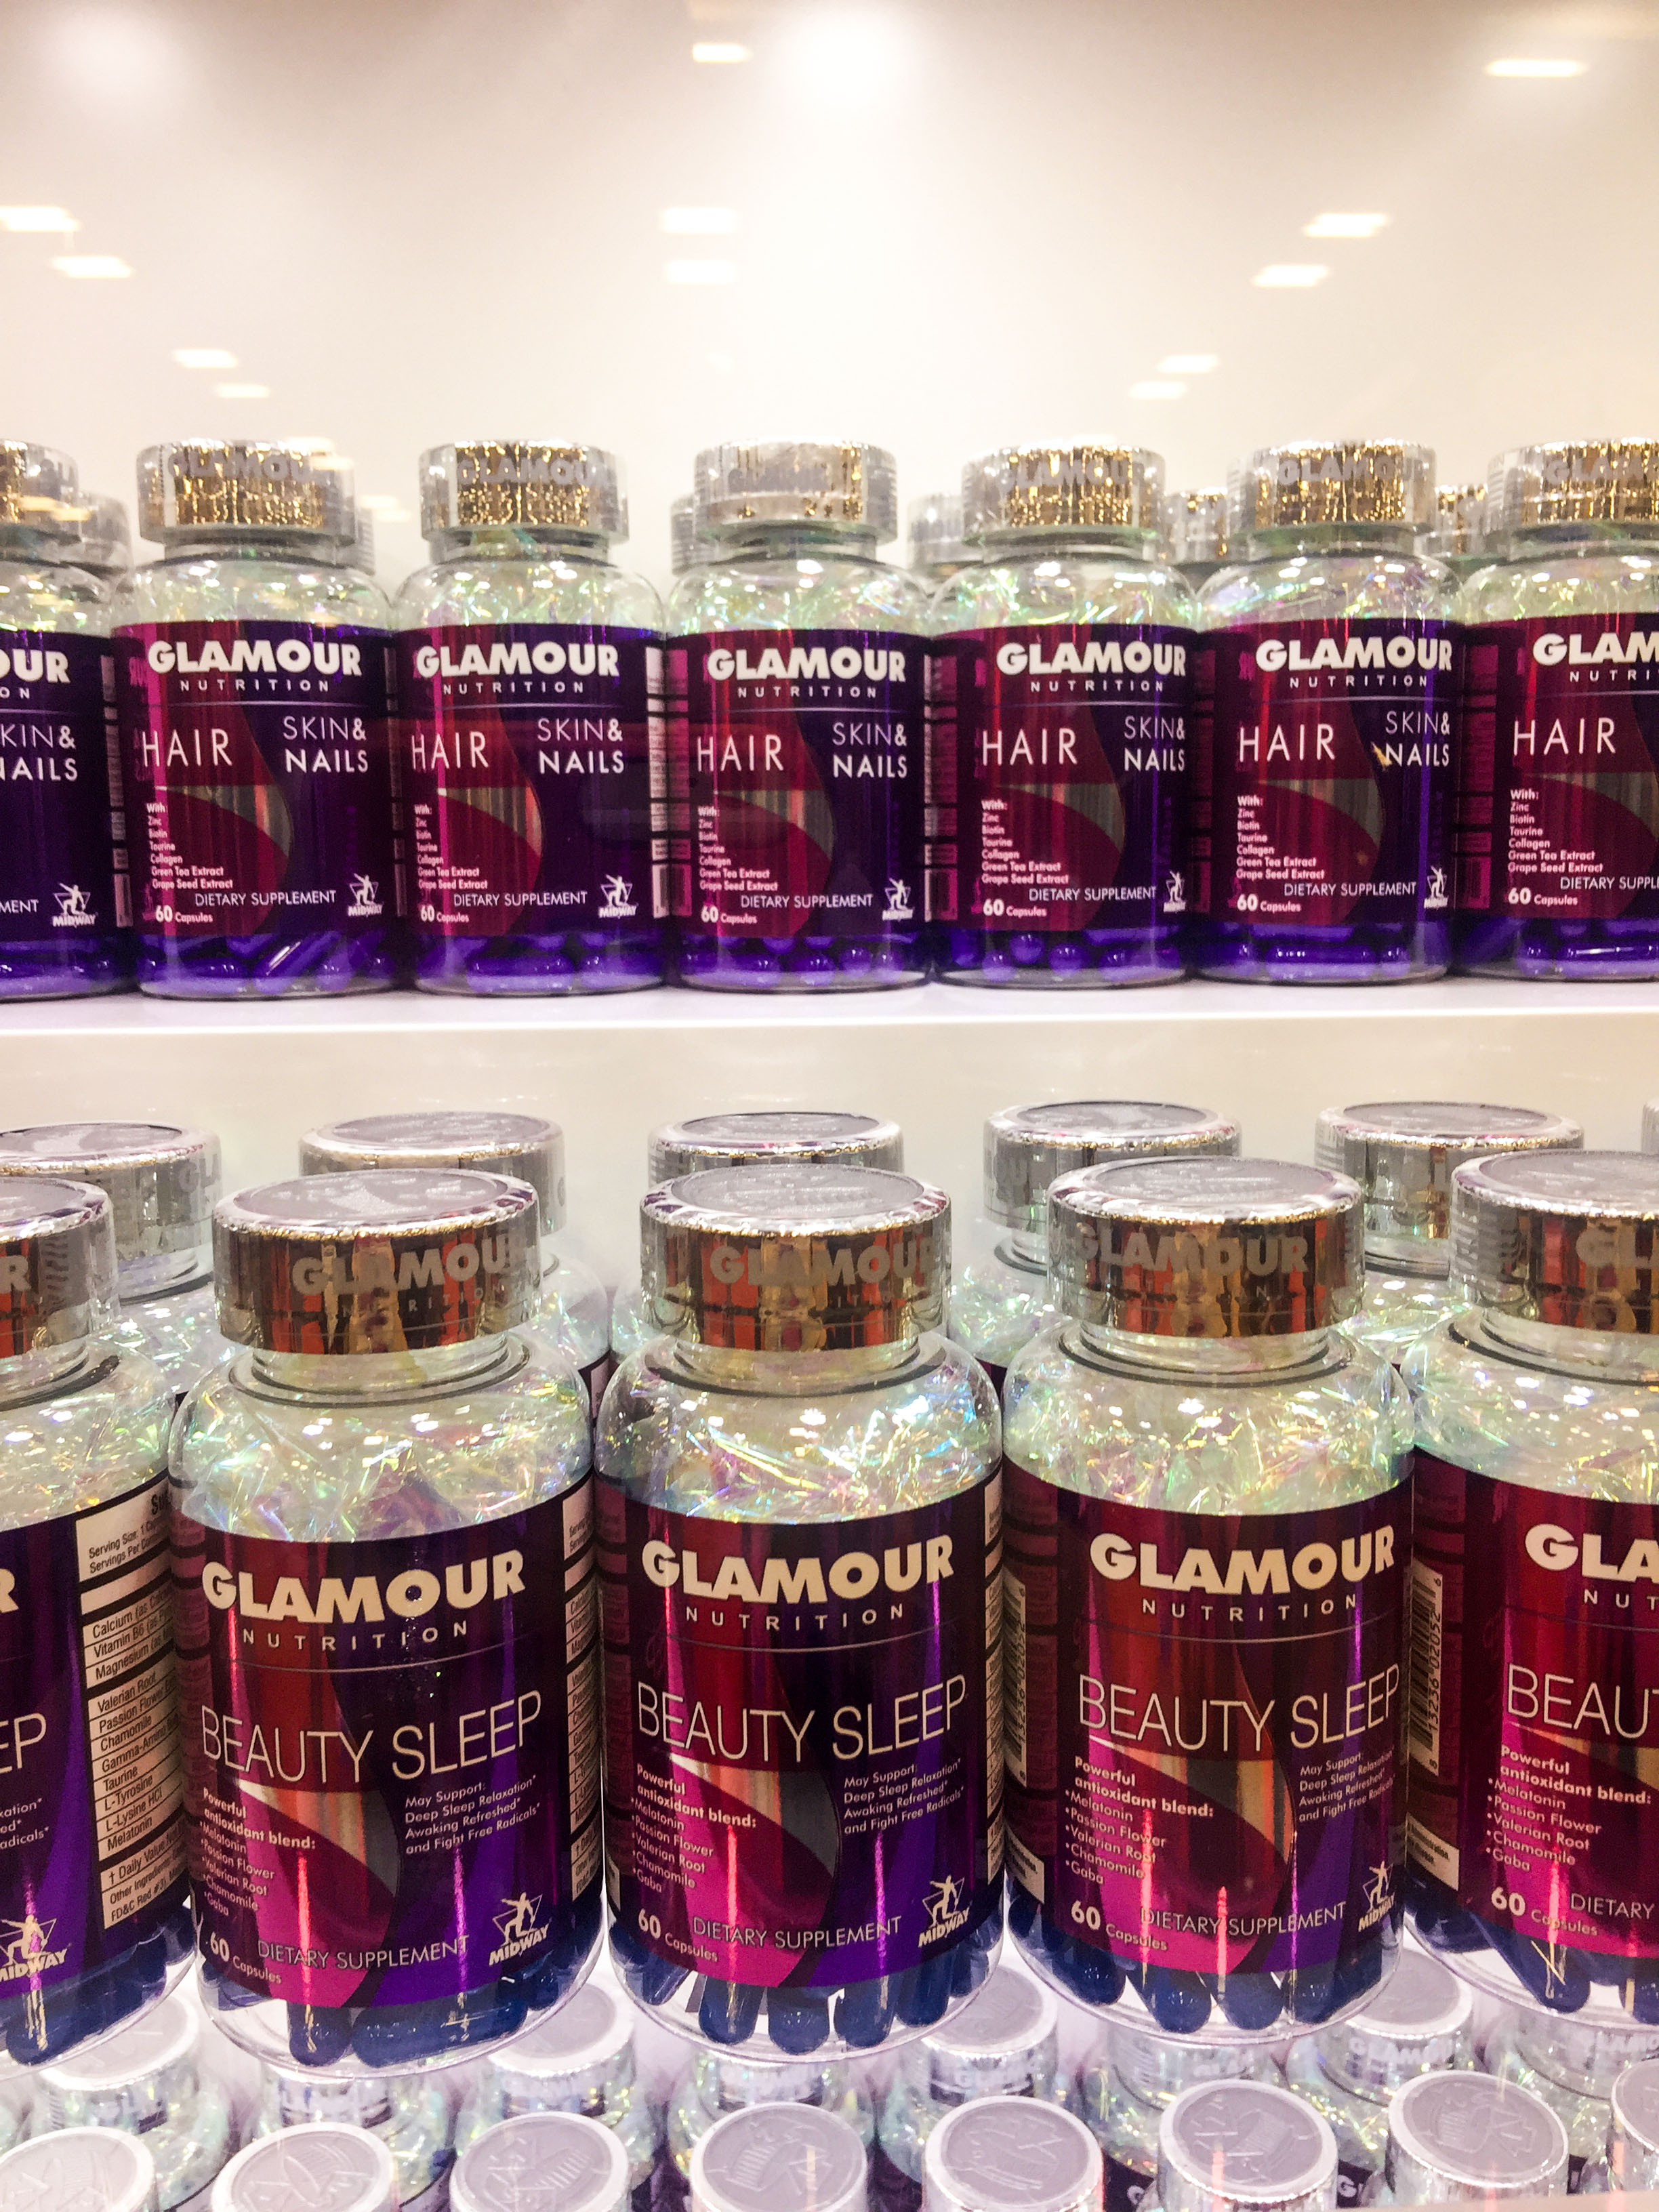 Glamour Nutrition Beauty Supplements.